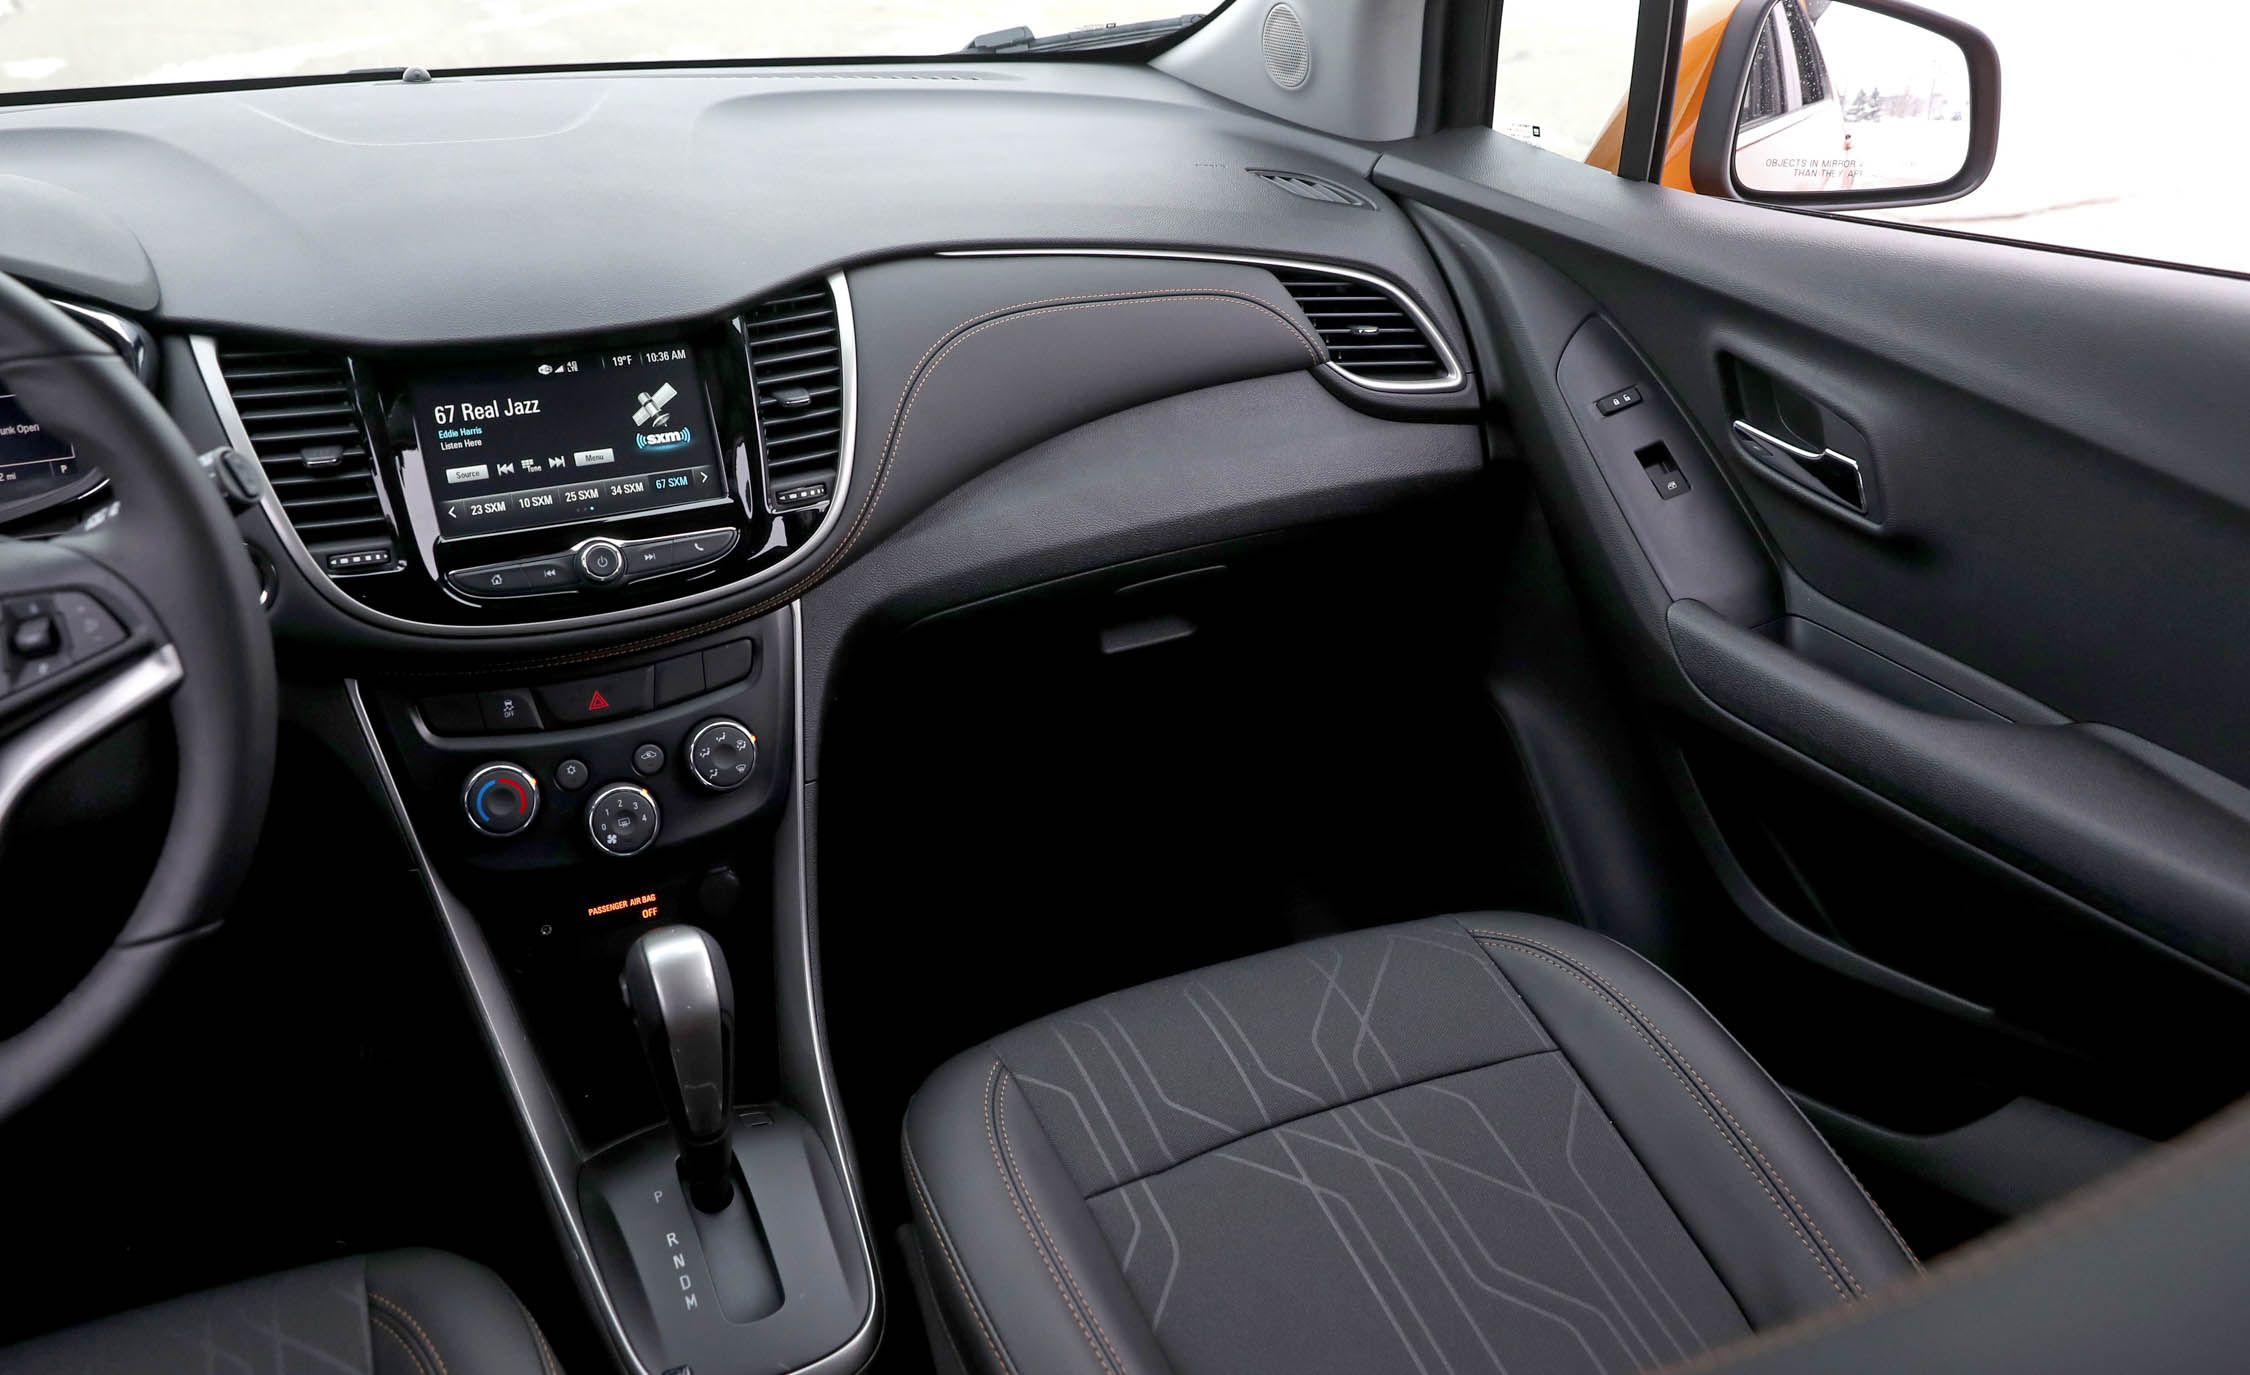 2017 Chevrolet Trax Interior Dashboard (View 28 of 47)